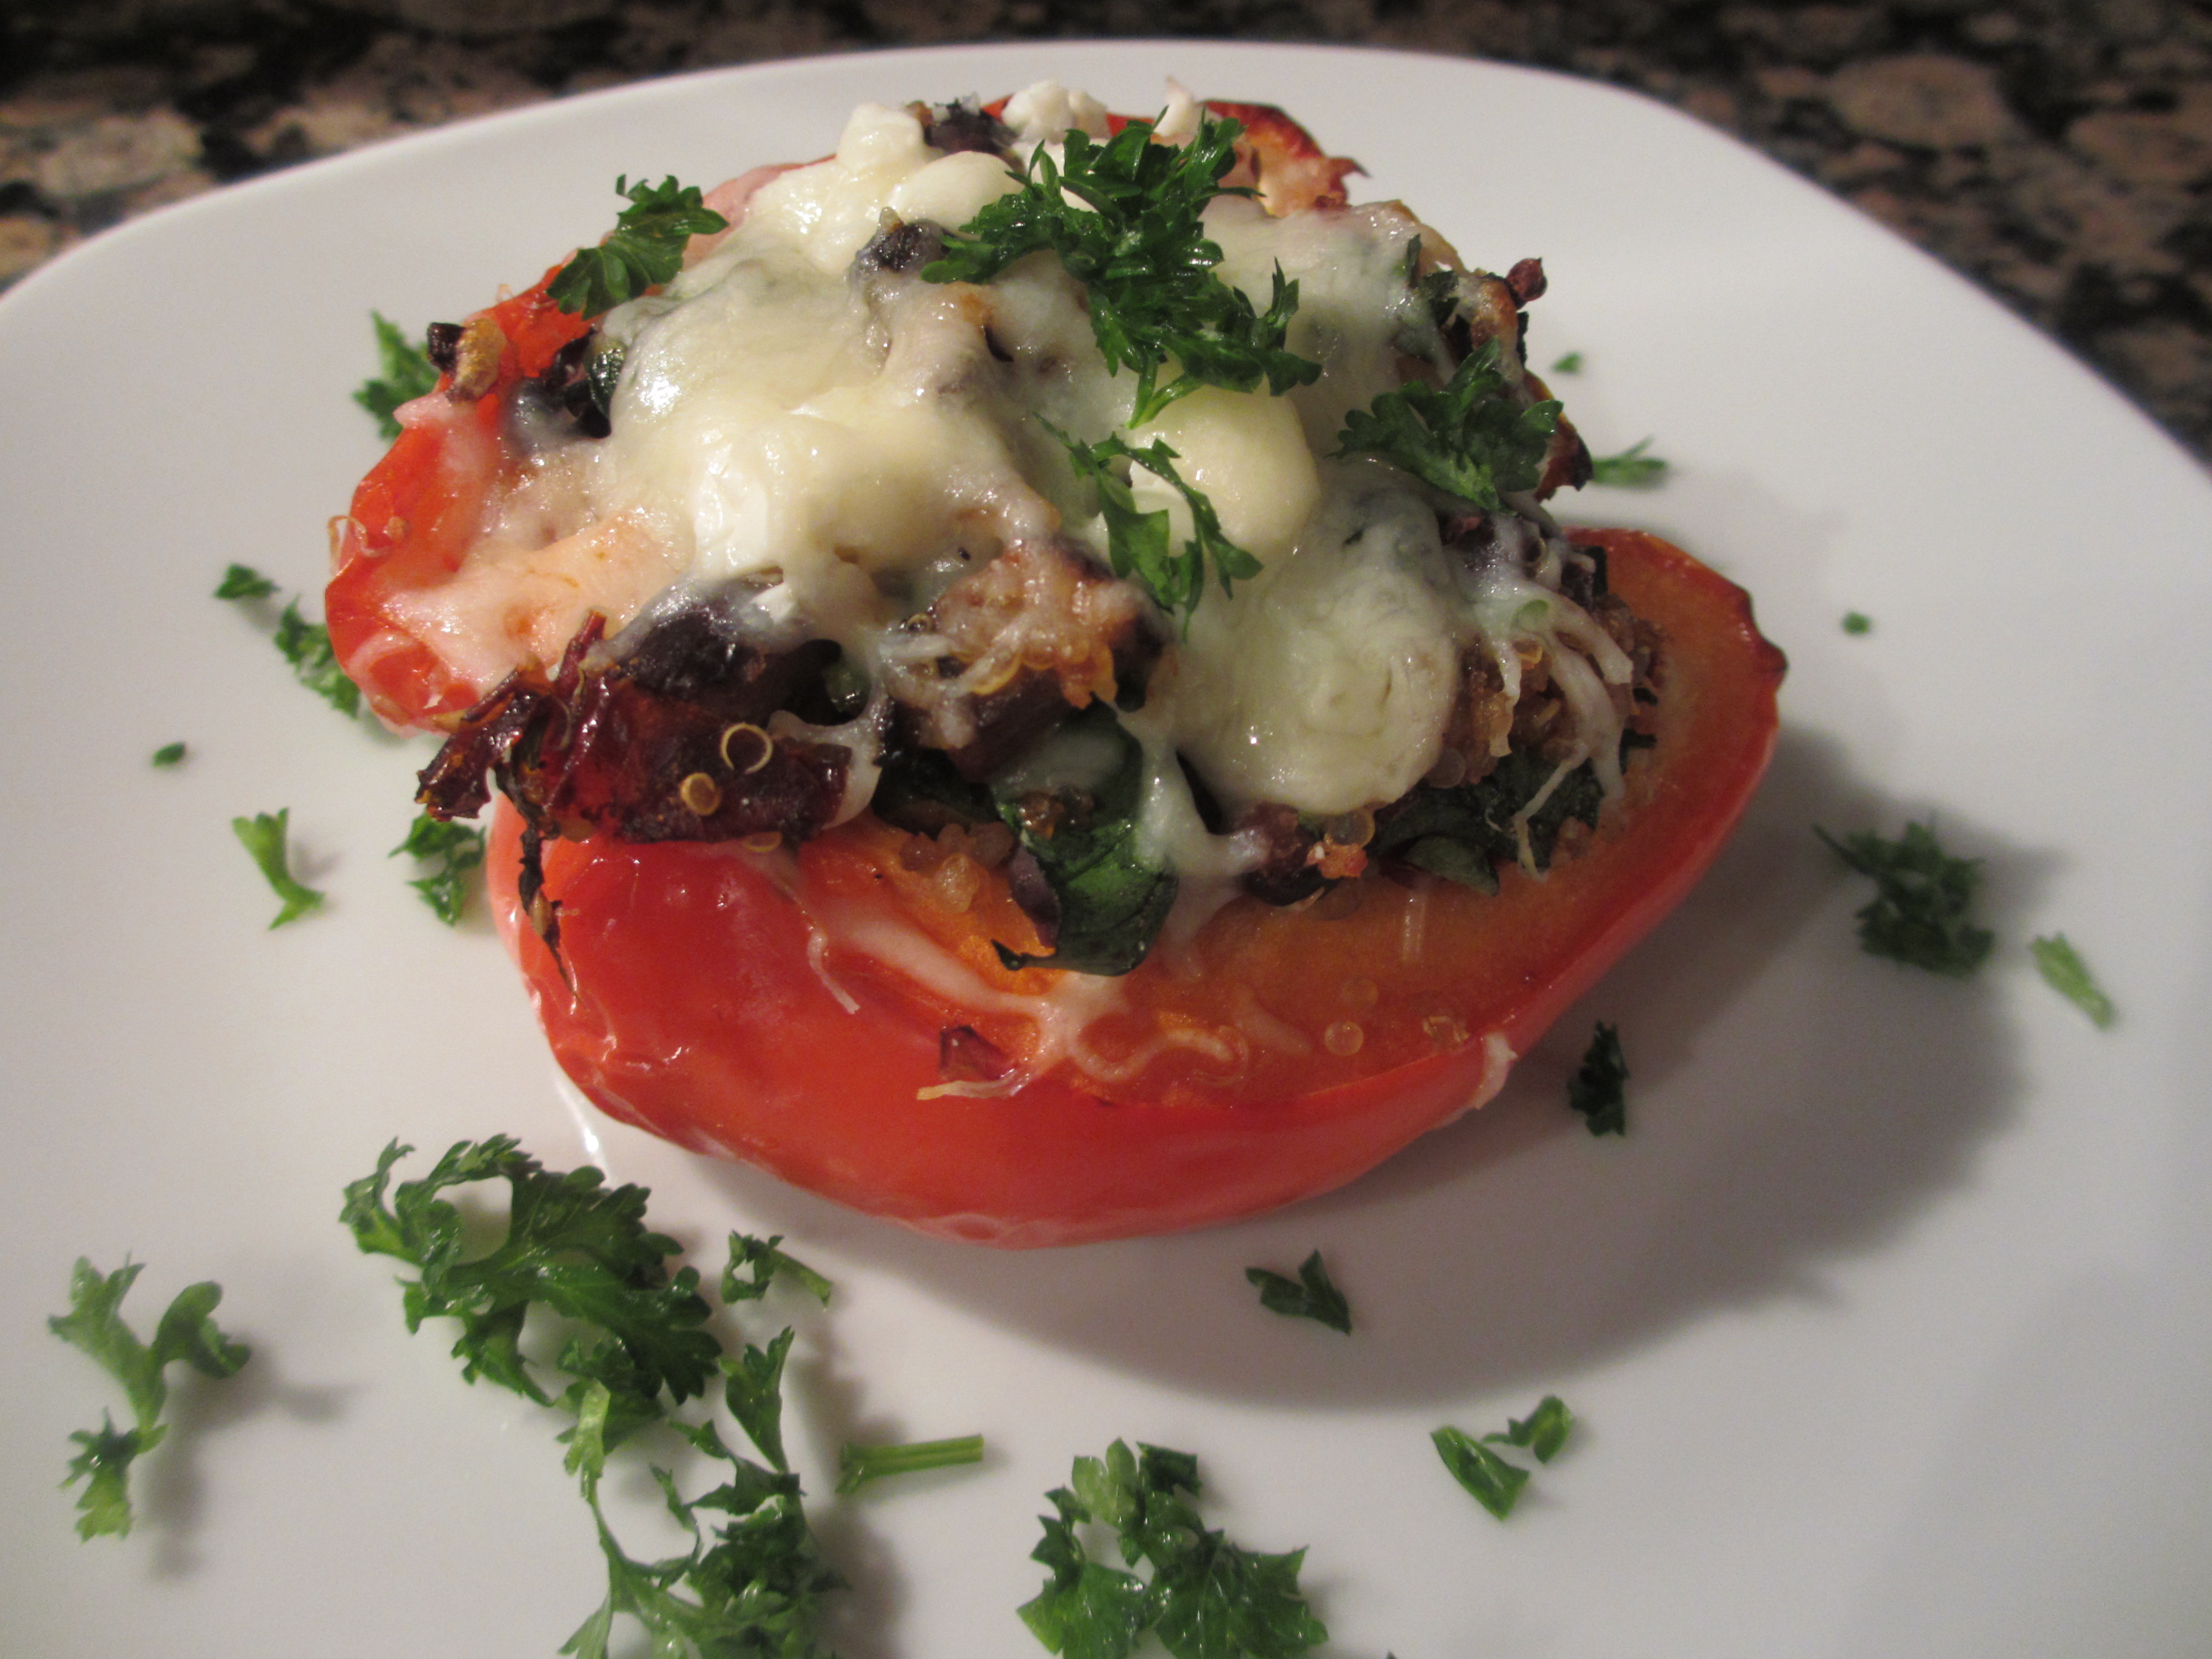 Stuffed bell pepper with melted cheese